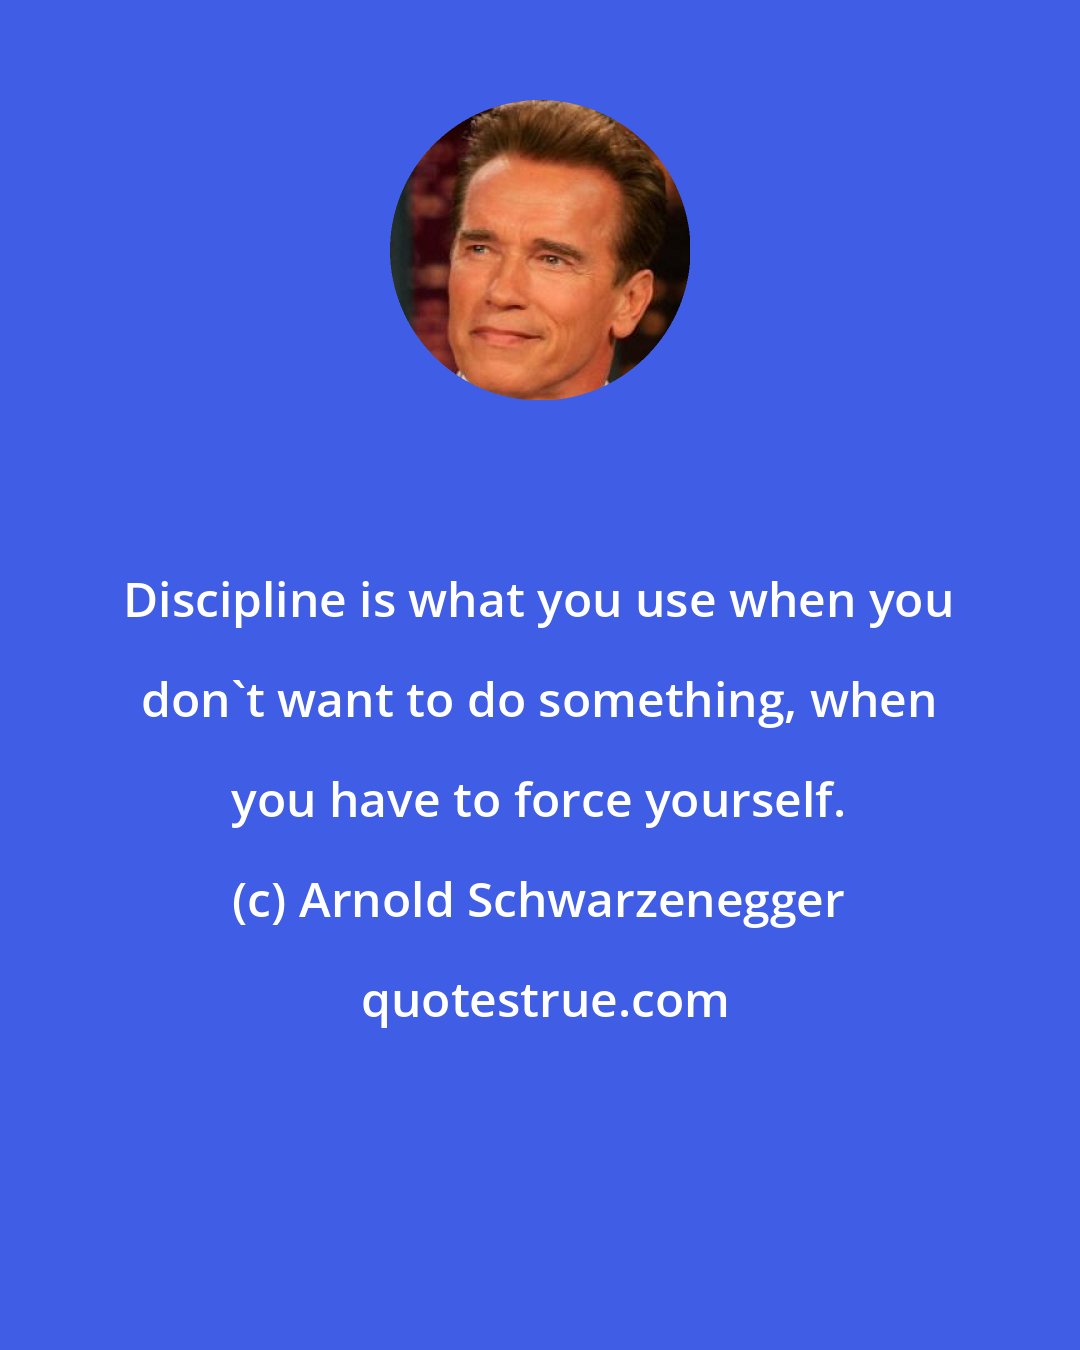 Arnold Schwarzenegger: Discipline is what you use when you don't want to do something, when you have to force yourself.